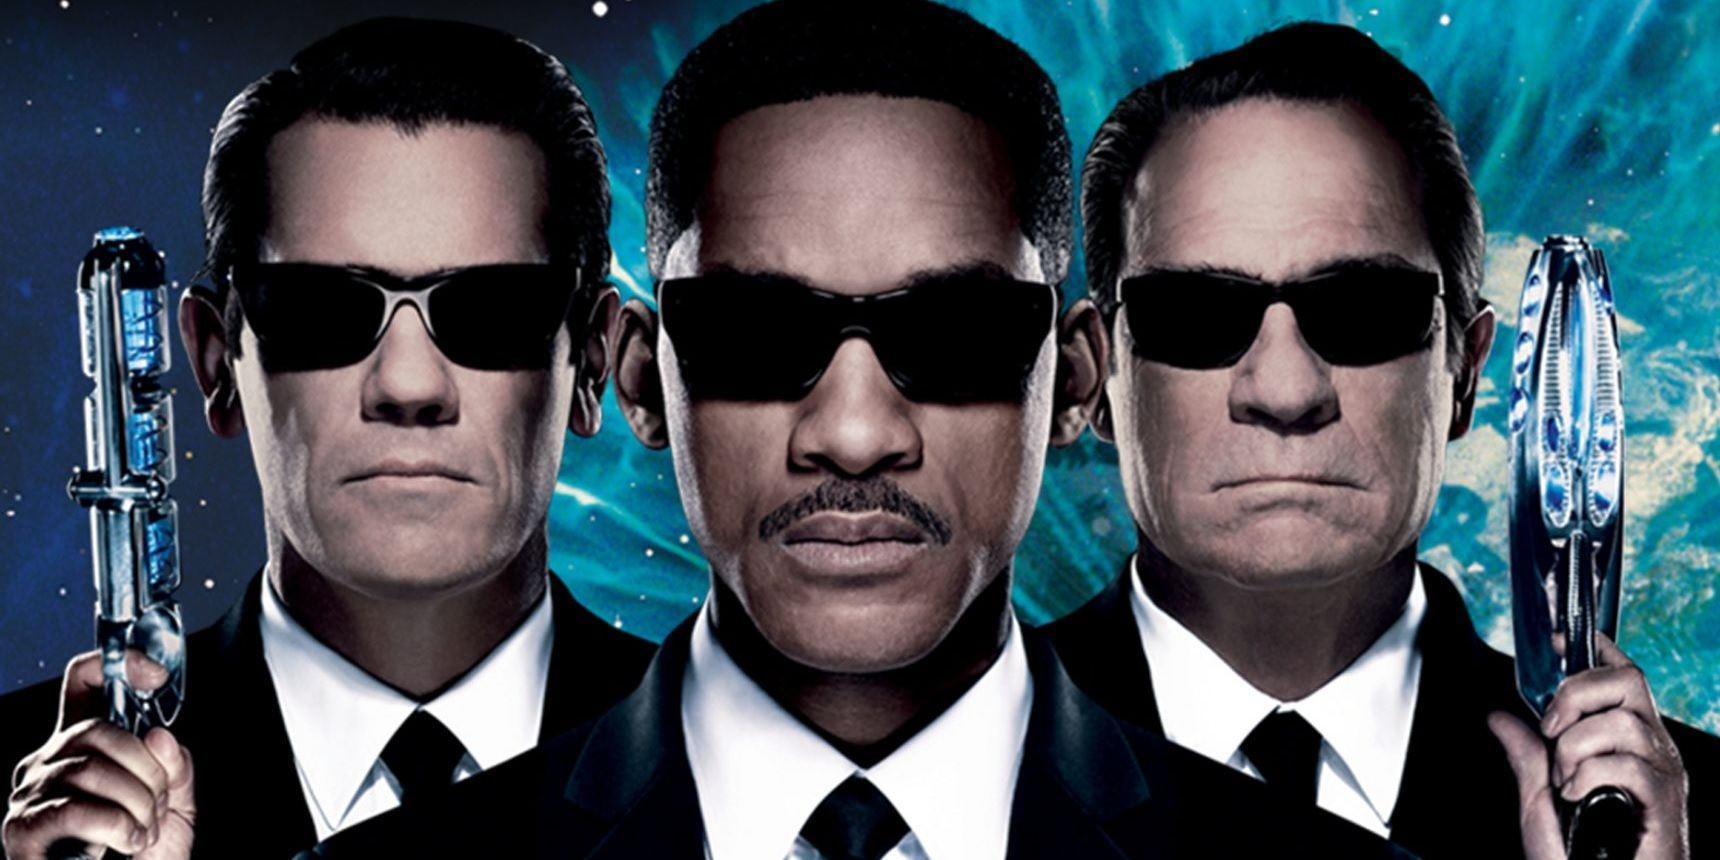 Will Smith, Josh Brolin, and Tommy Lee Jones on the poster for Men in Black 3